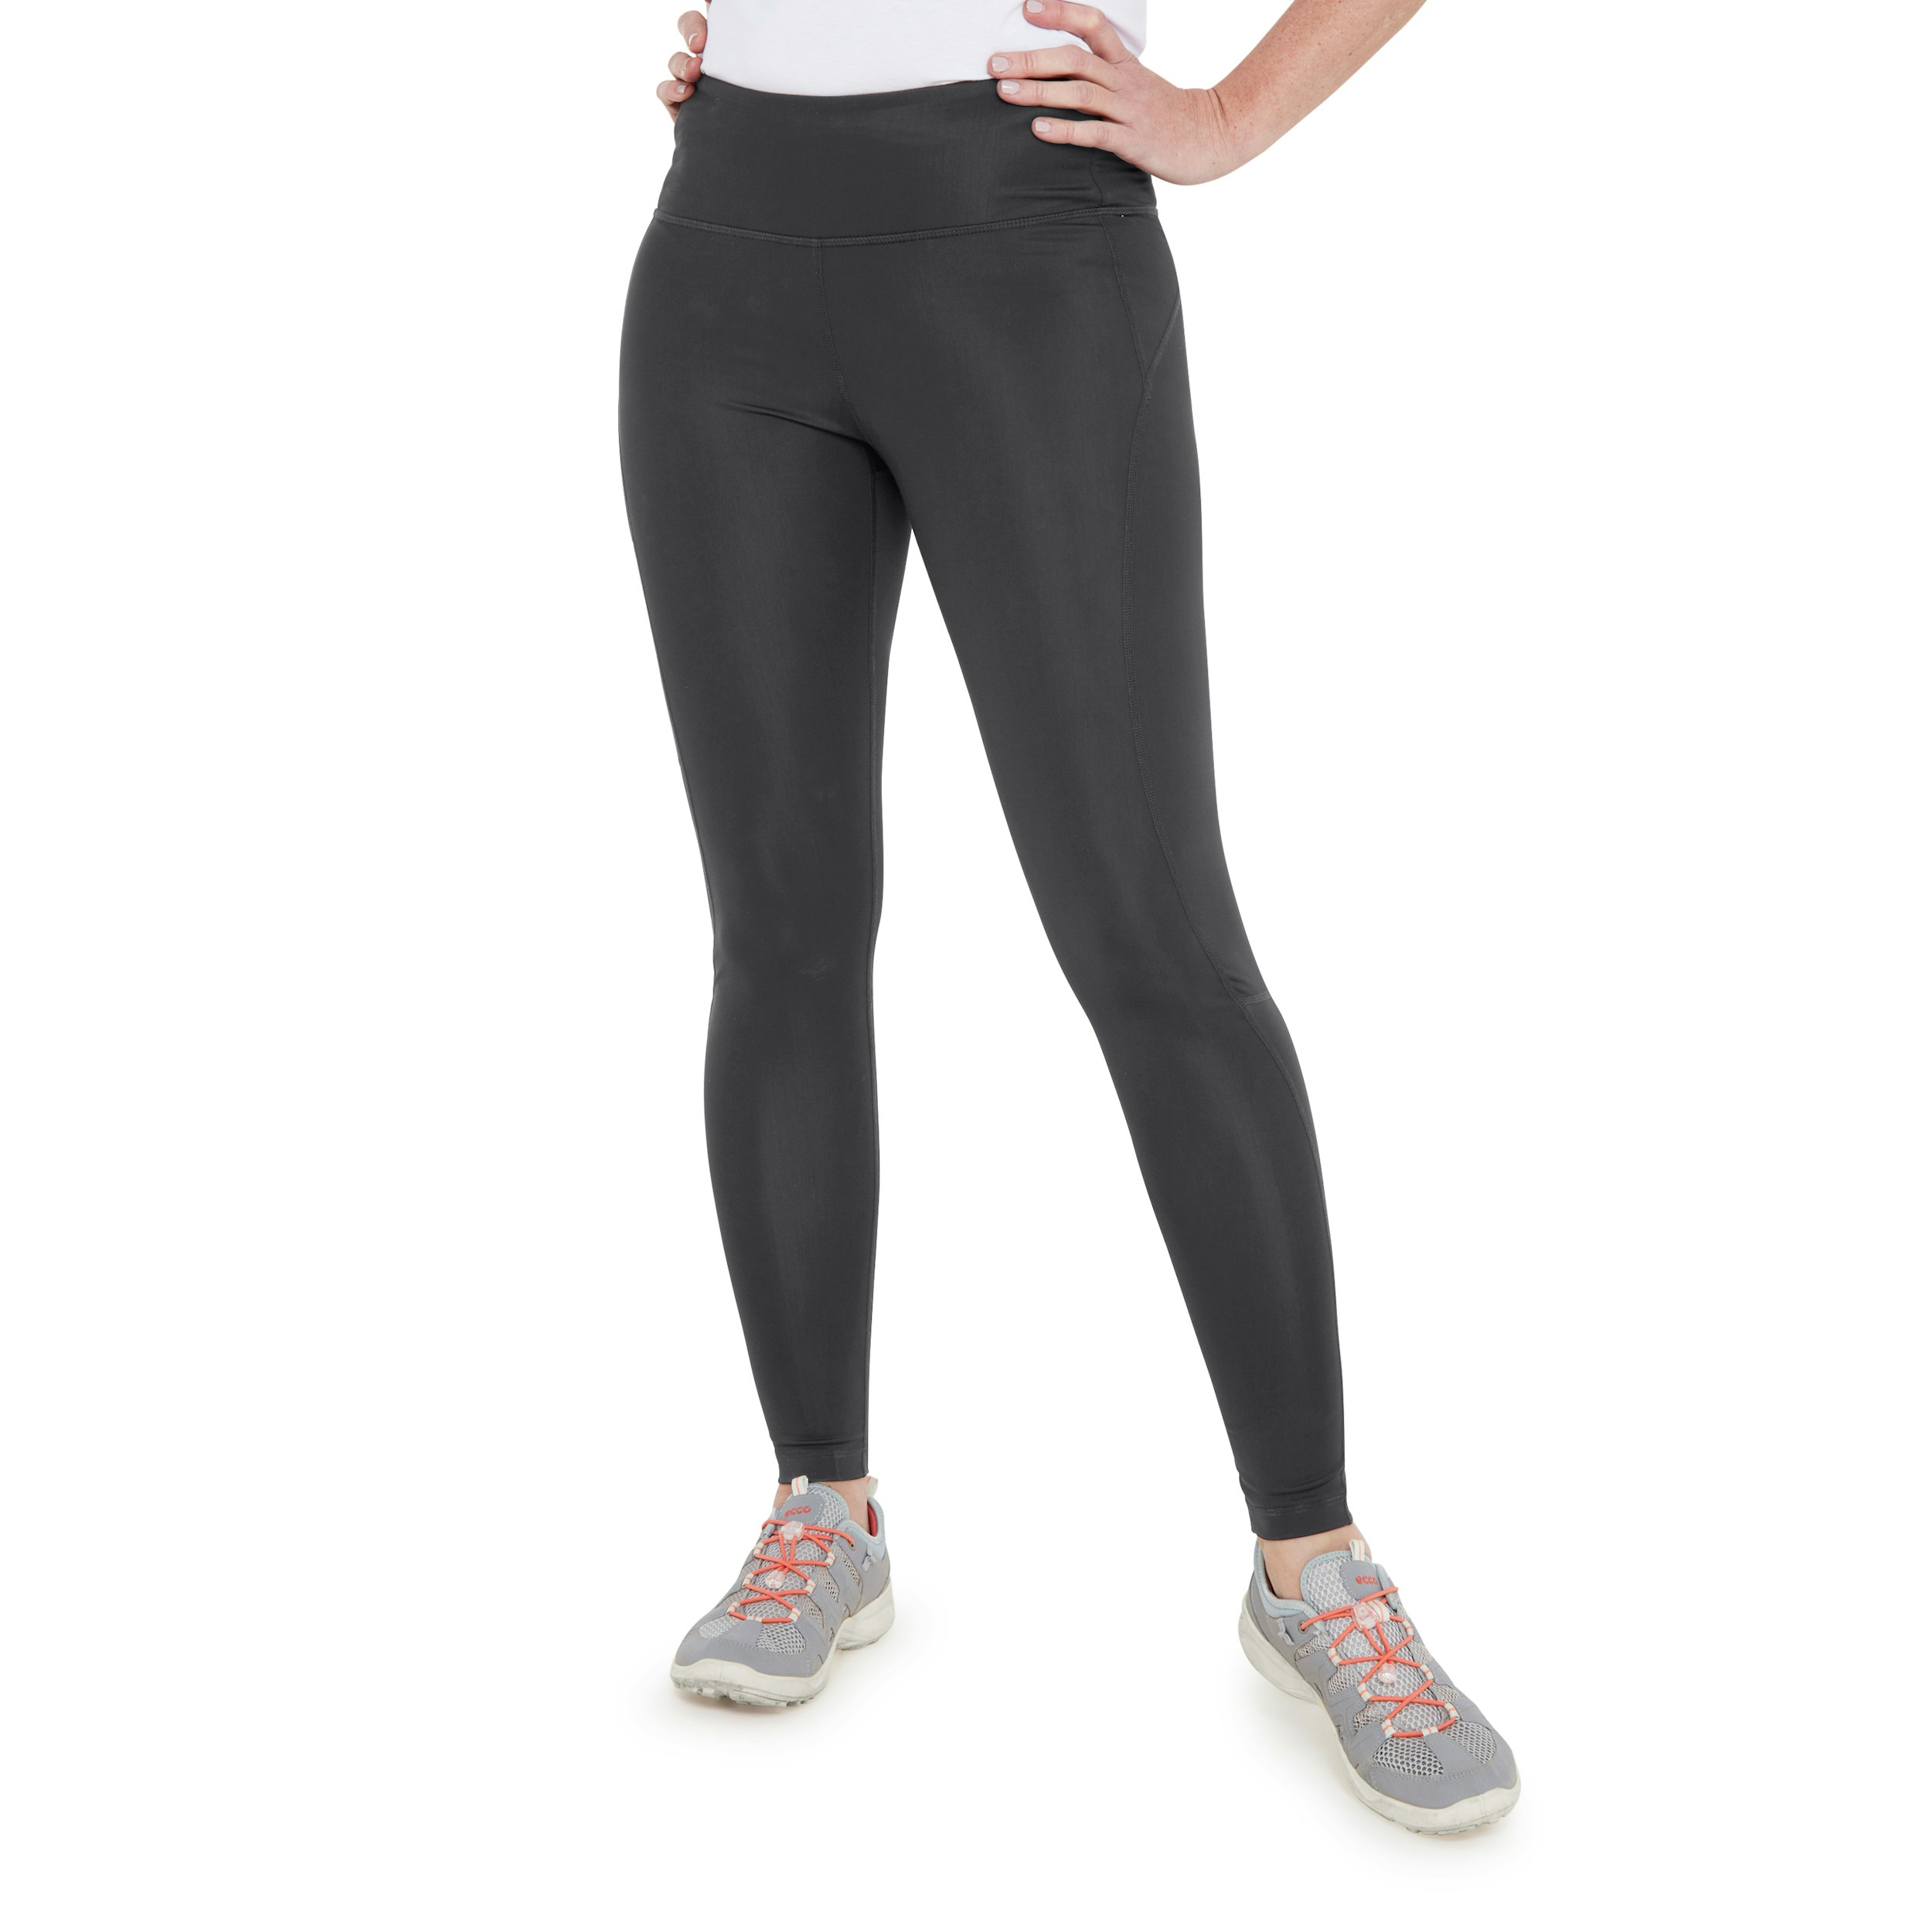 Craghoppers Women's Velocity Tights